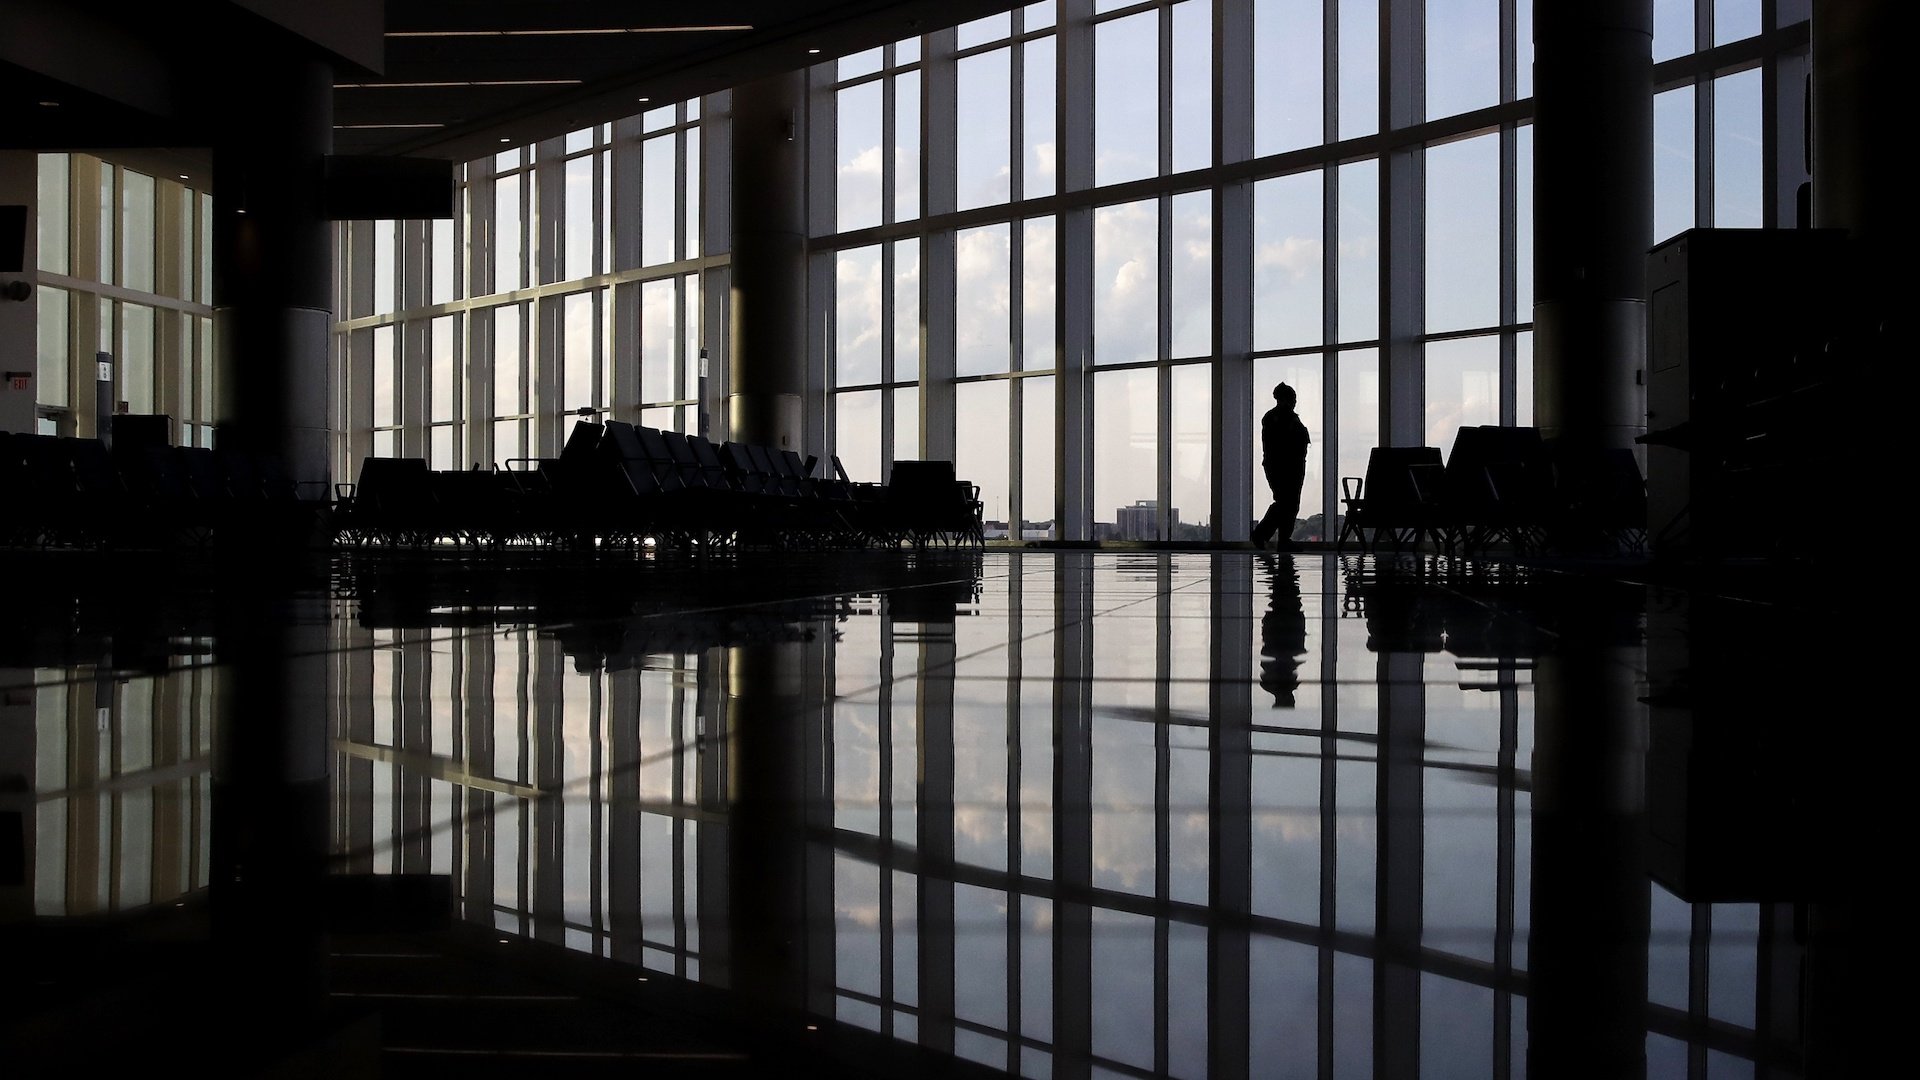 In this June 1, 2020 file photo, a woman looks through a window at a near-empty terminal at an airport in Atlanta. The coronavirus pandemic has taken a harsh toll on the mental health of young Americans, according to a new poll. (AP Photo/Charlie Riedel, File)